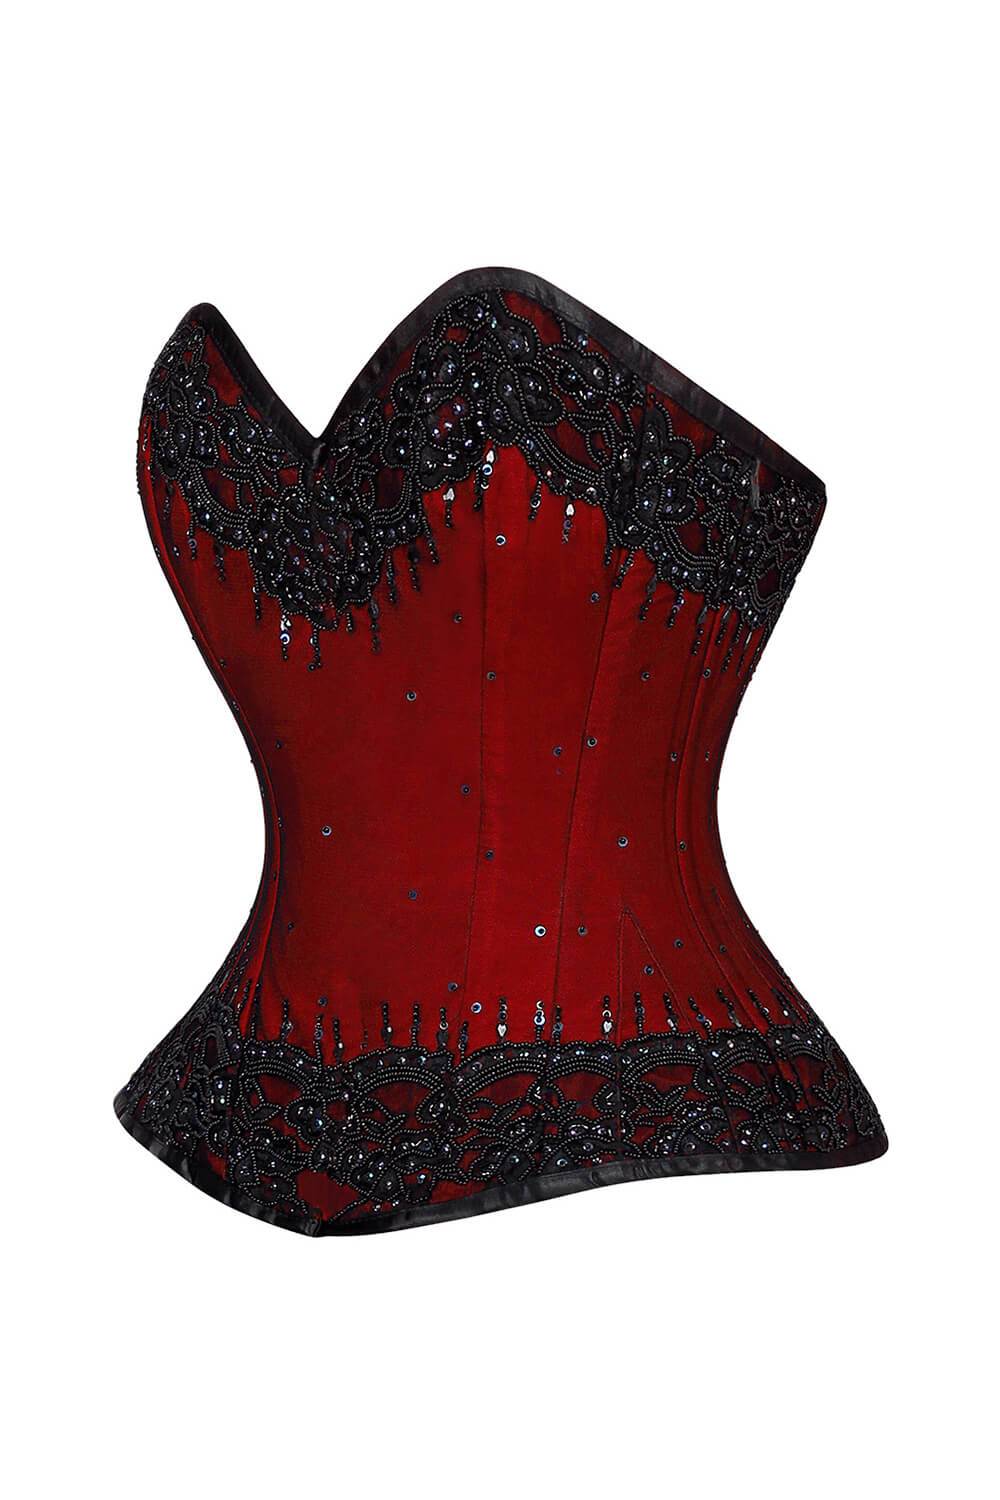 The front and left side of the red and black Beaded Lace Overlay Couture Corset.